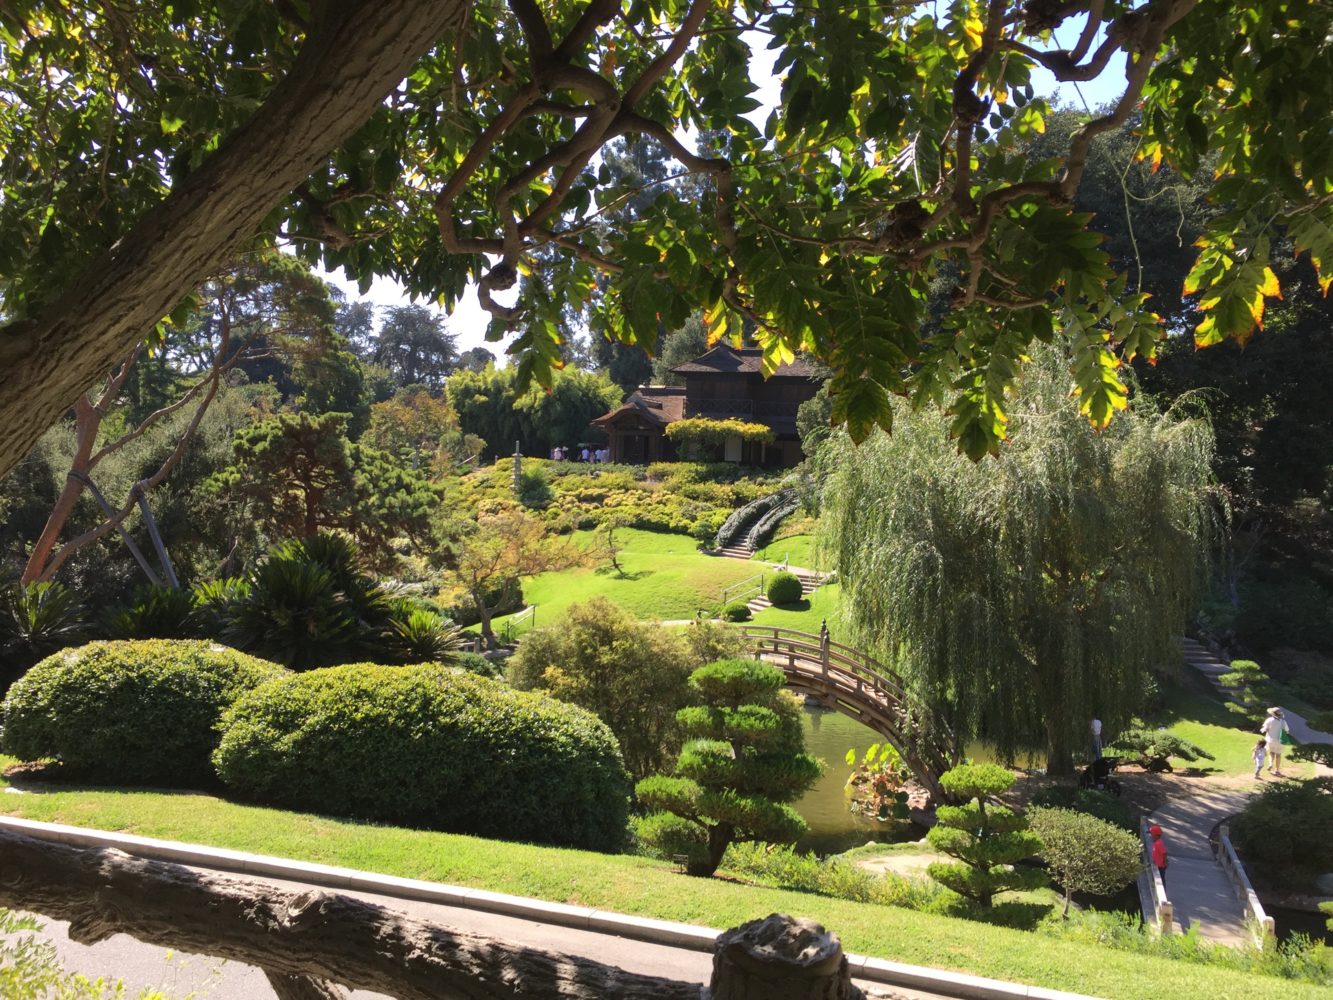 The best toddler approved parks and gardens in LA.